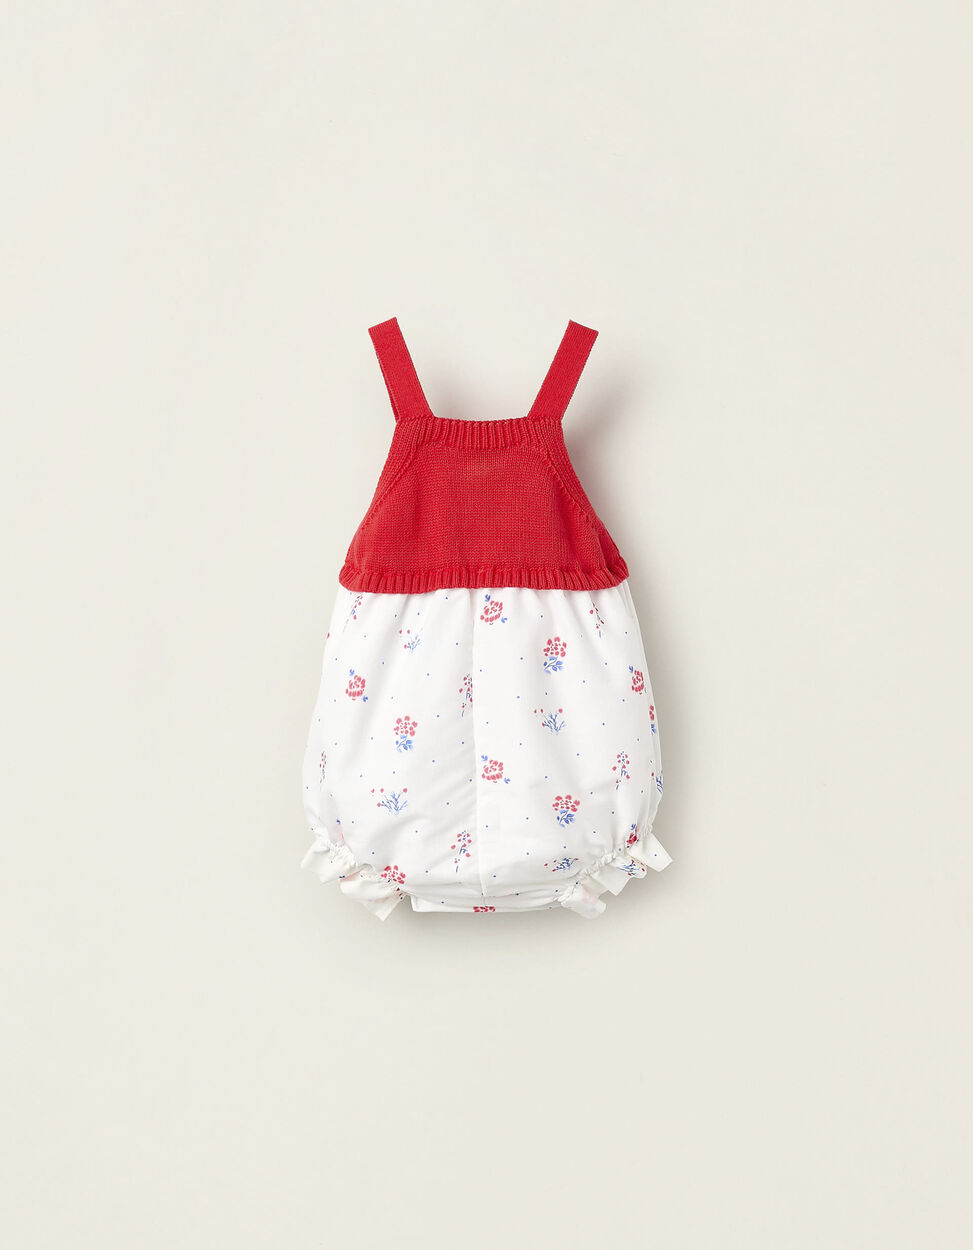 Buy Online Dual-fabric Jumpsuit for Newborn Girls, Red/White